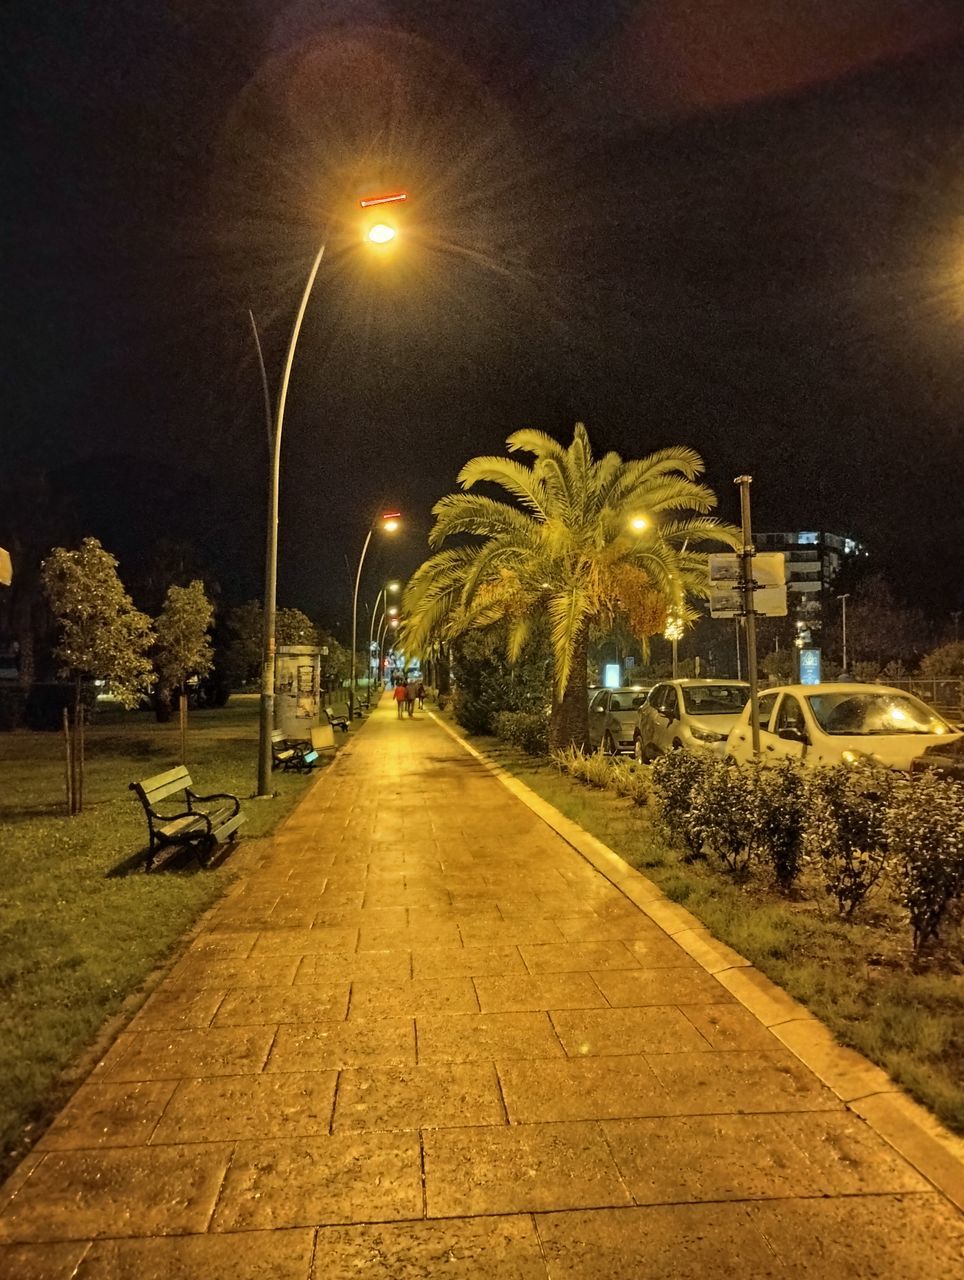 night, street light, illuminated, street, light, evening, the way forward, lighting, lighting equipment, city, plant, architecture, transportation, no people, sky, nature, darkness, tree, footpath, road, diminishing perspective, outdoors, built structure